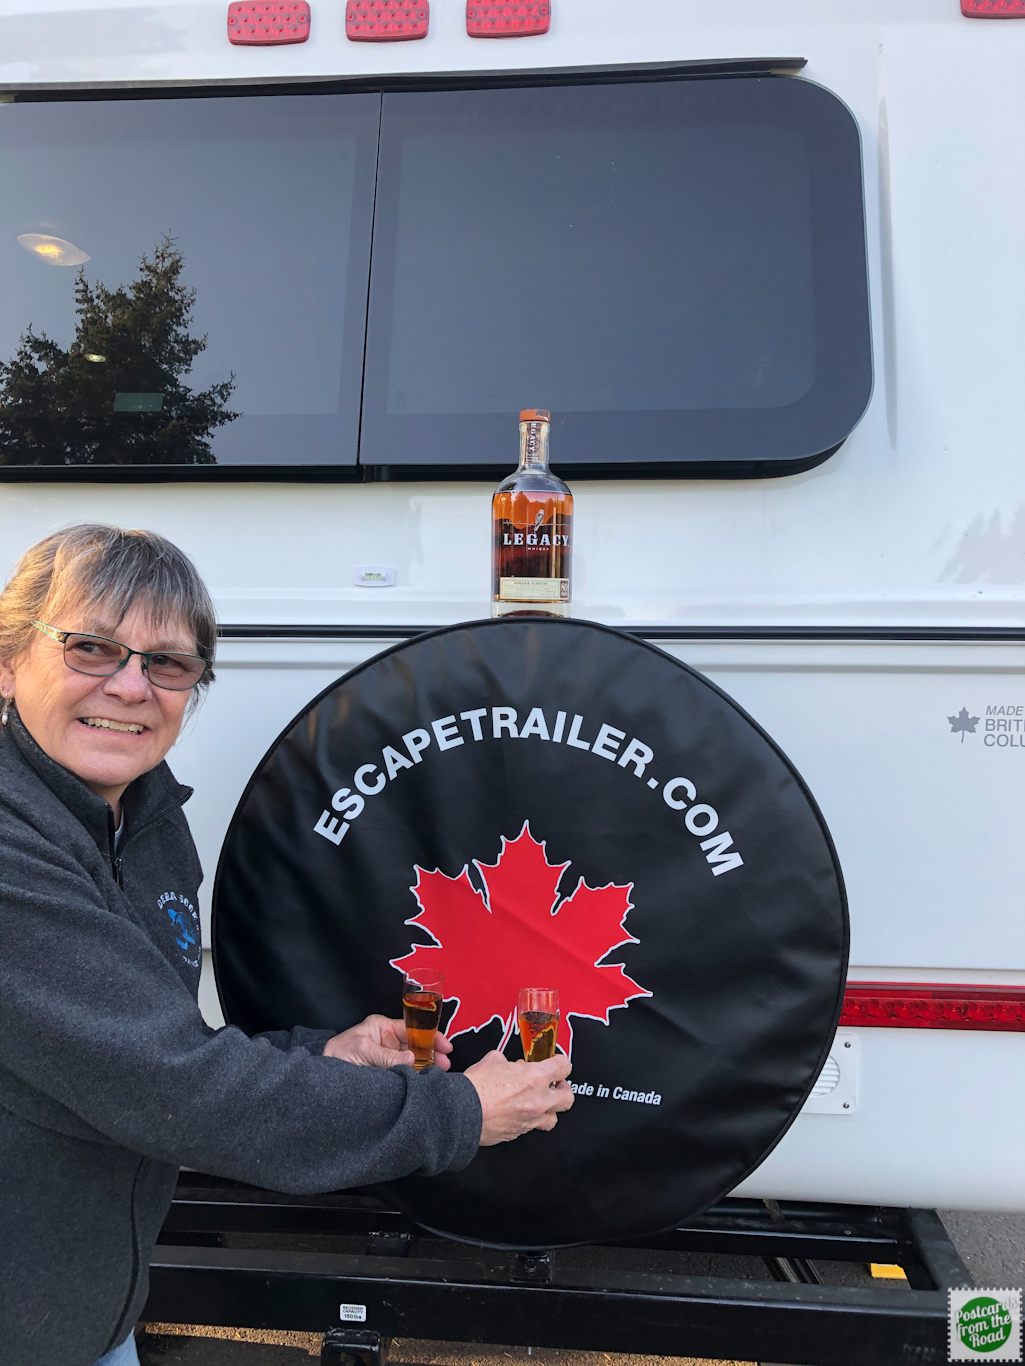 We seldom drink whiskey, but... we just had to toast “Bud”, our new Canadian built trailer, with some fine Canadian whiskey. Life is good!